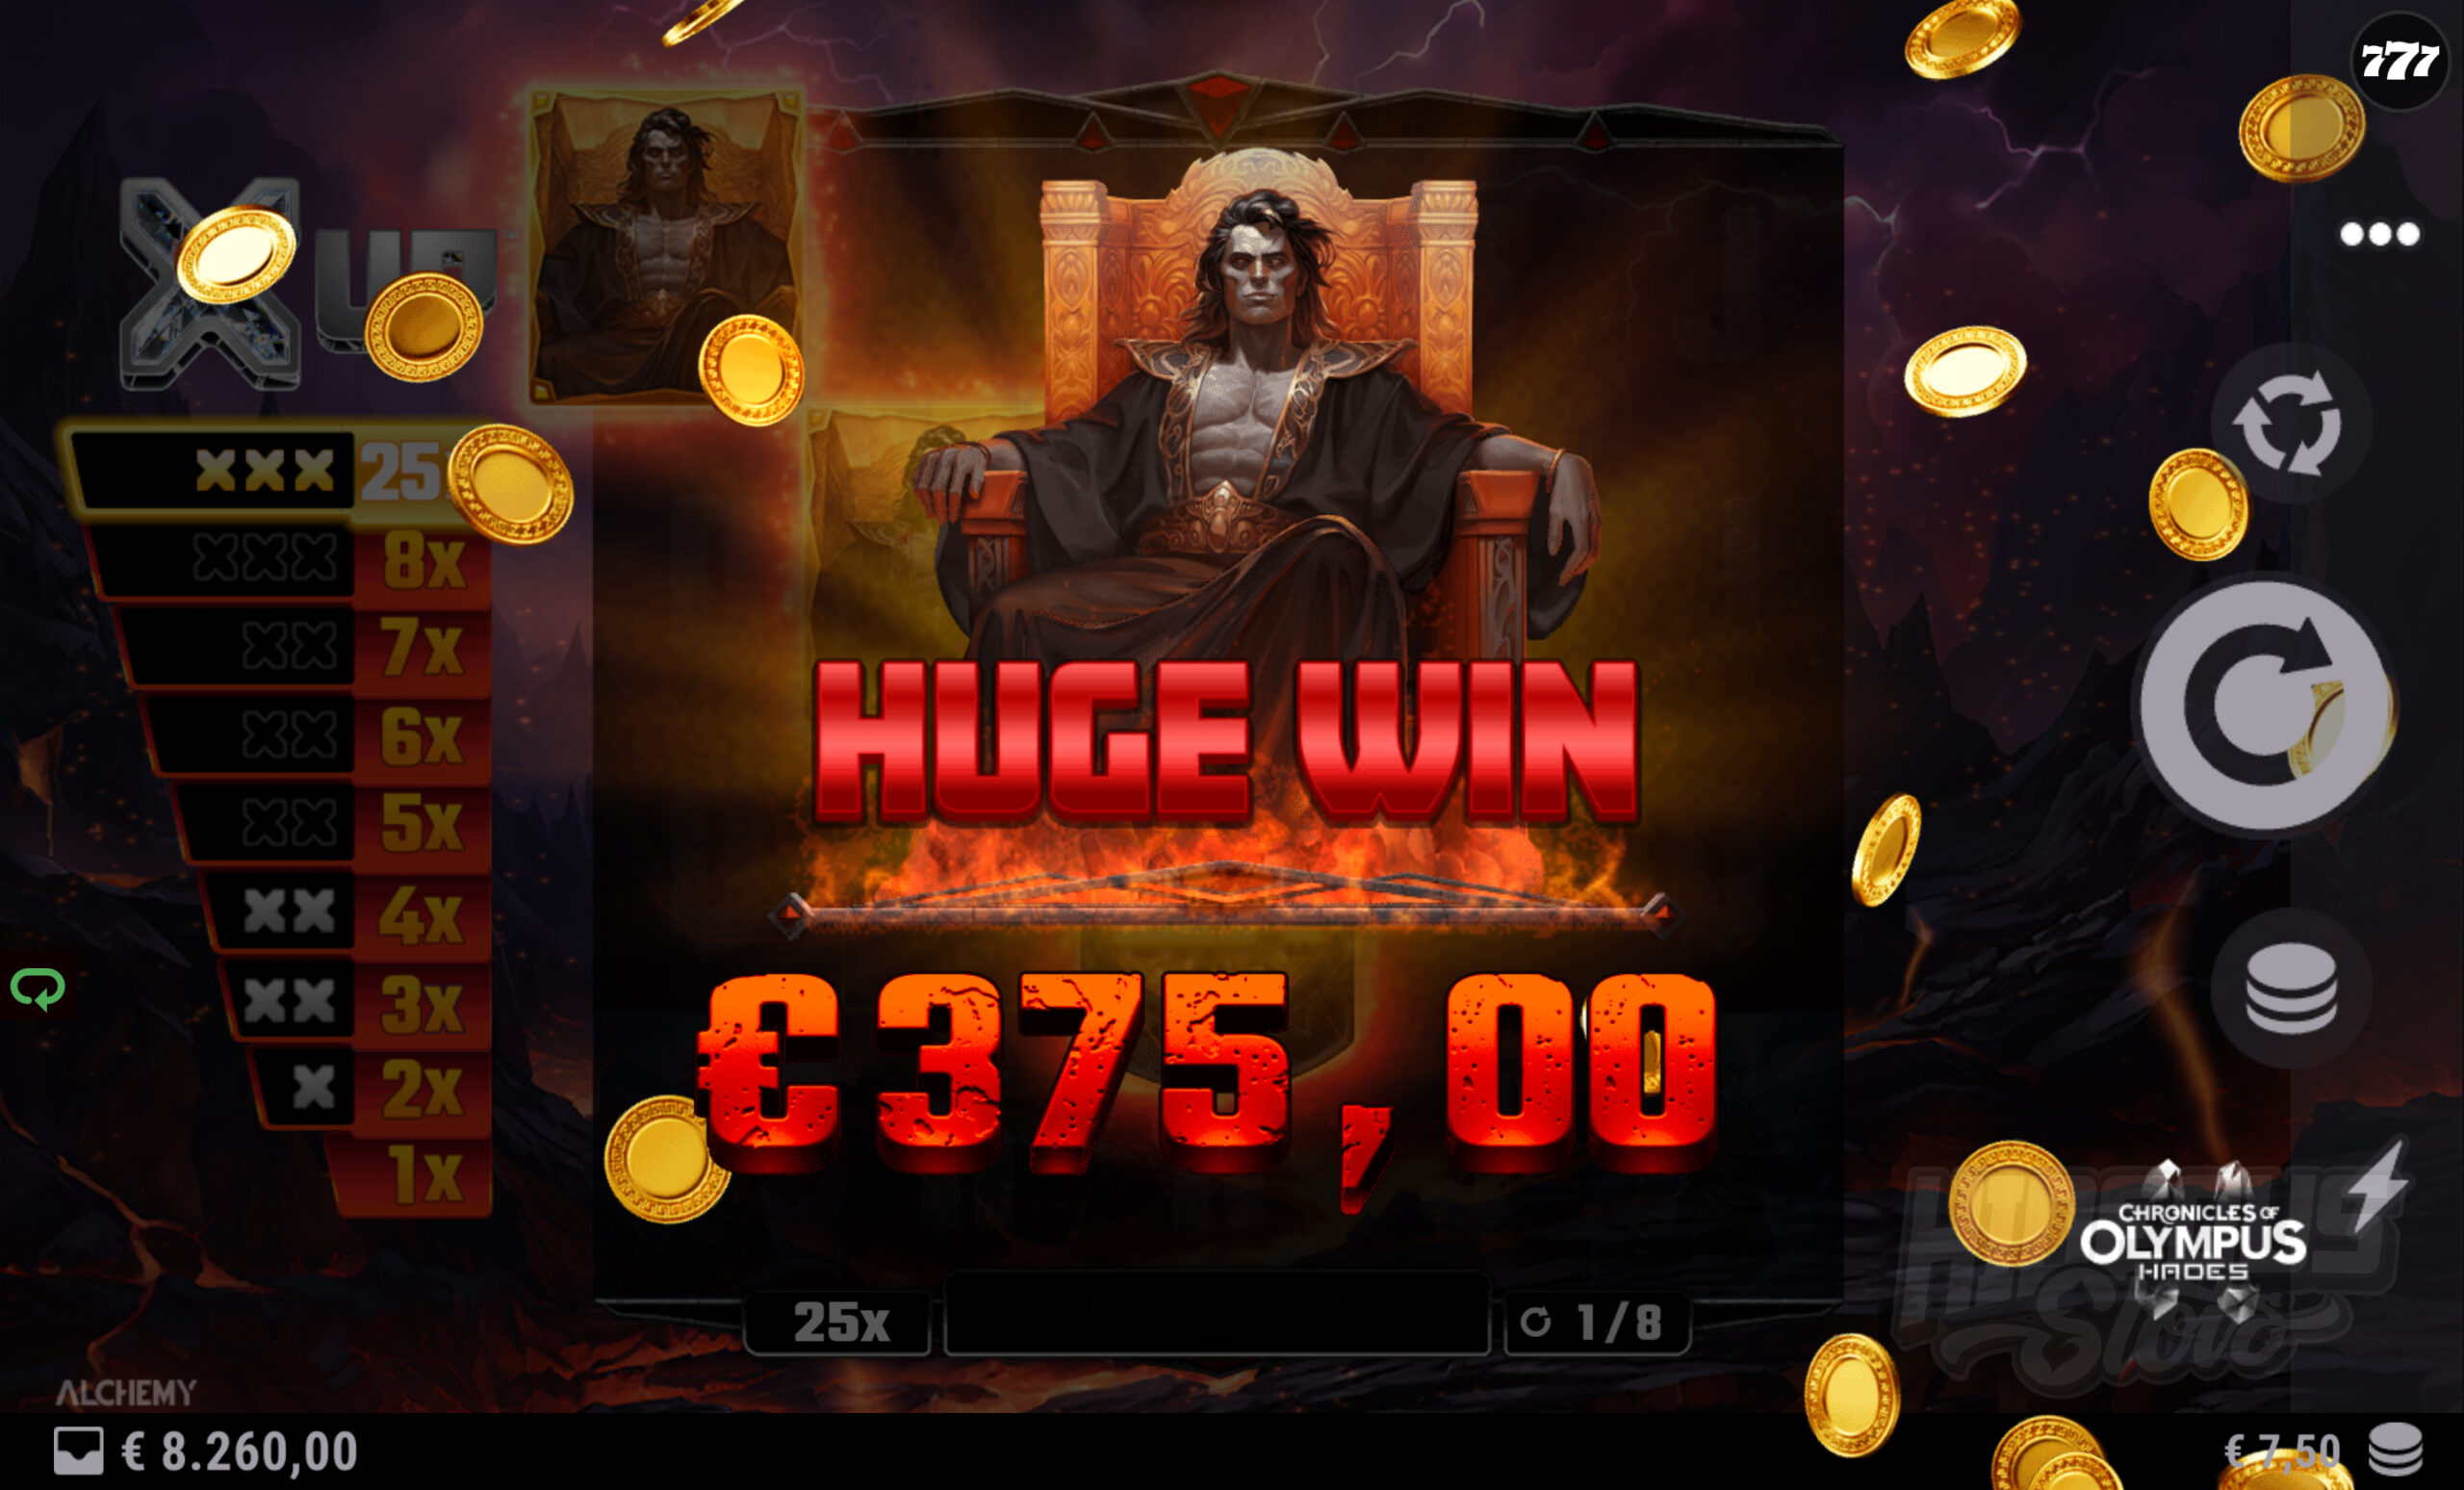 Wild Symbols With 5x Multipliers Can Continue to Land During Free Spins